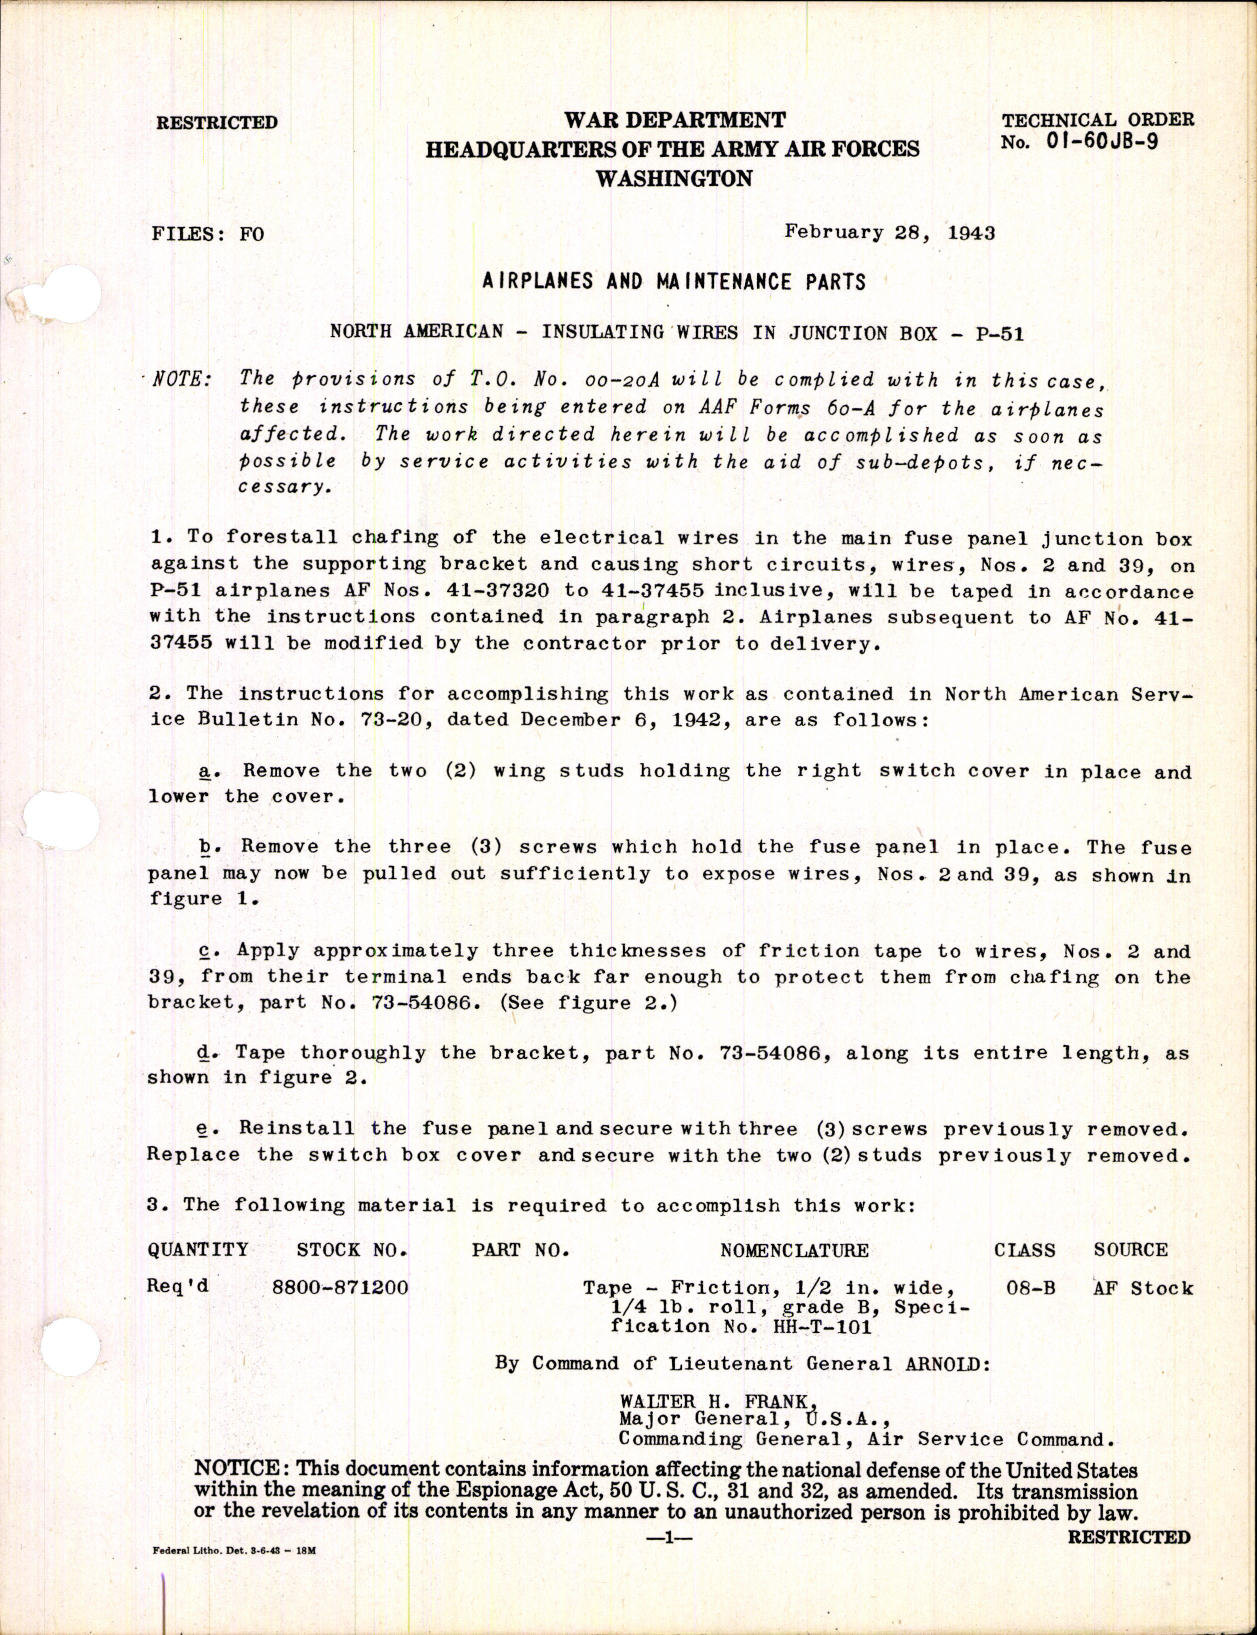 Sample page 1 from AirCorps Library document: Insulating Wires in Junction Box for the P-51